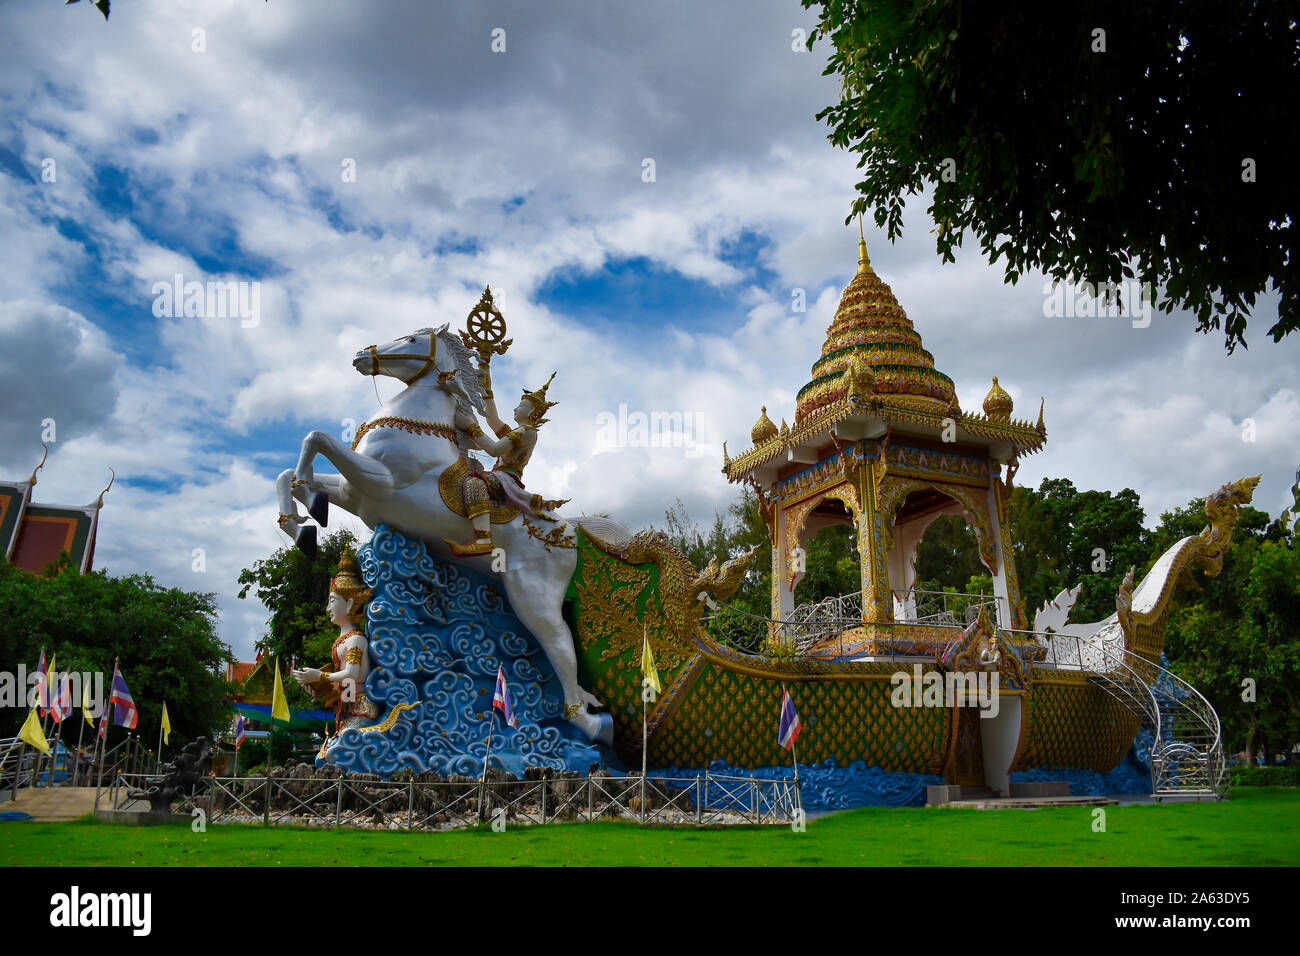 Kanchanaburi, Thailand 08.17.2019: Statue of Deity, god or goddess riding a detailed, ornately decorated white horse tracking a golden boat at the Wat Stock Photo